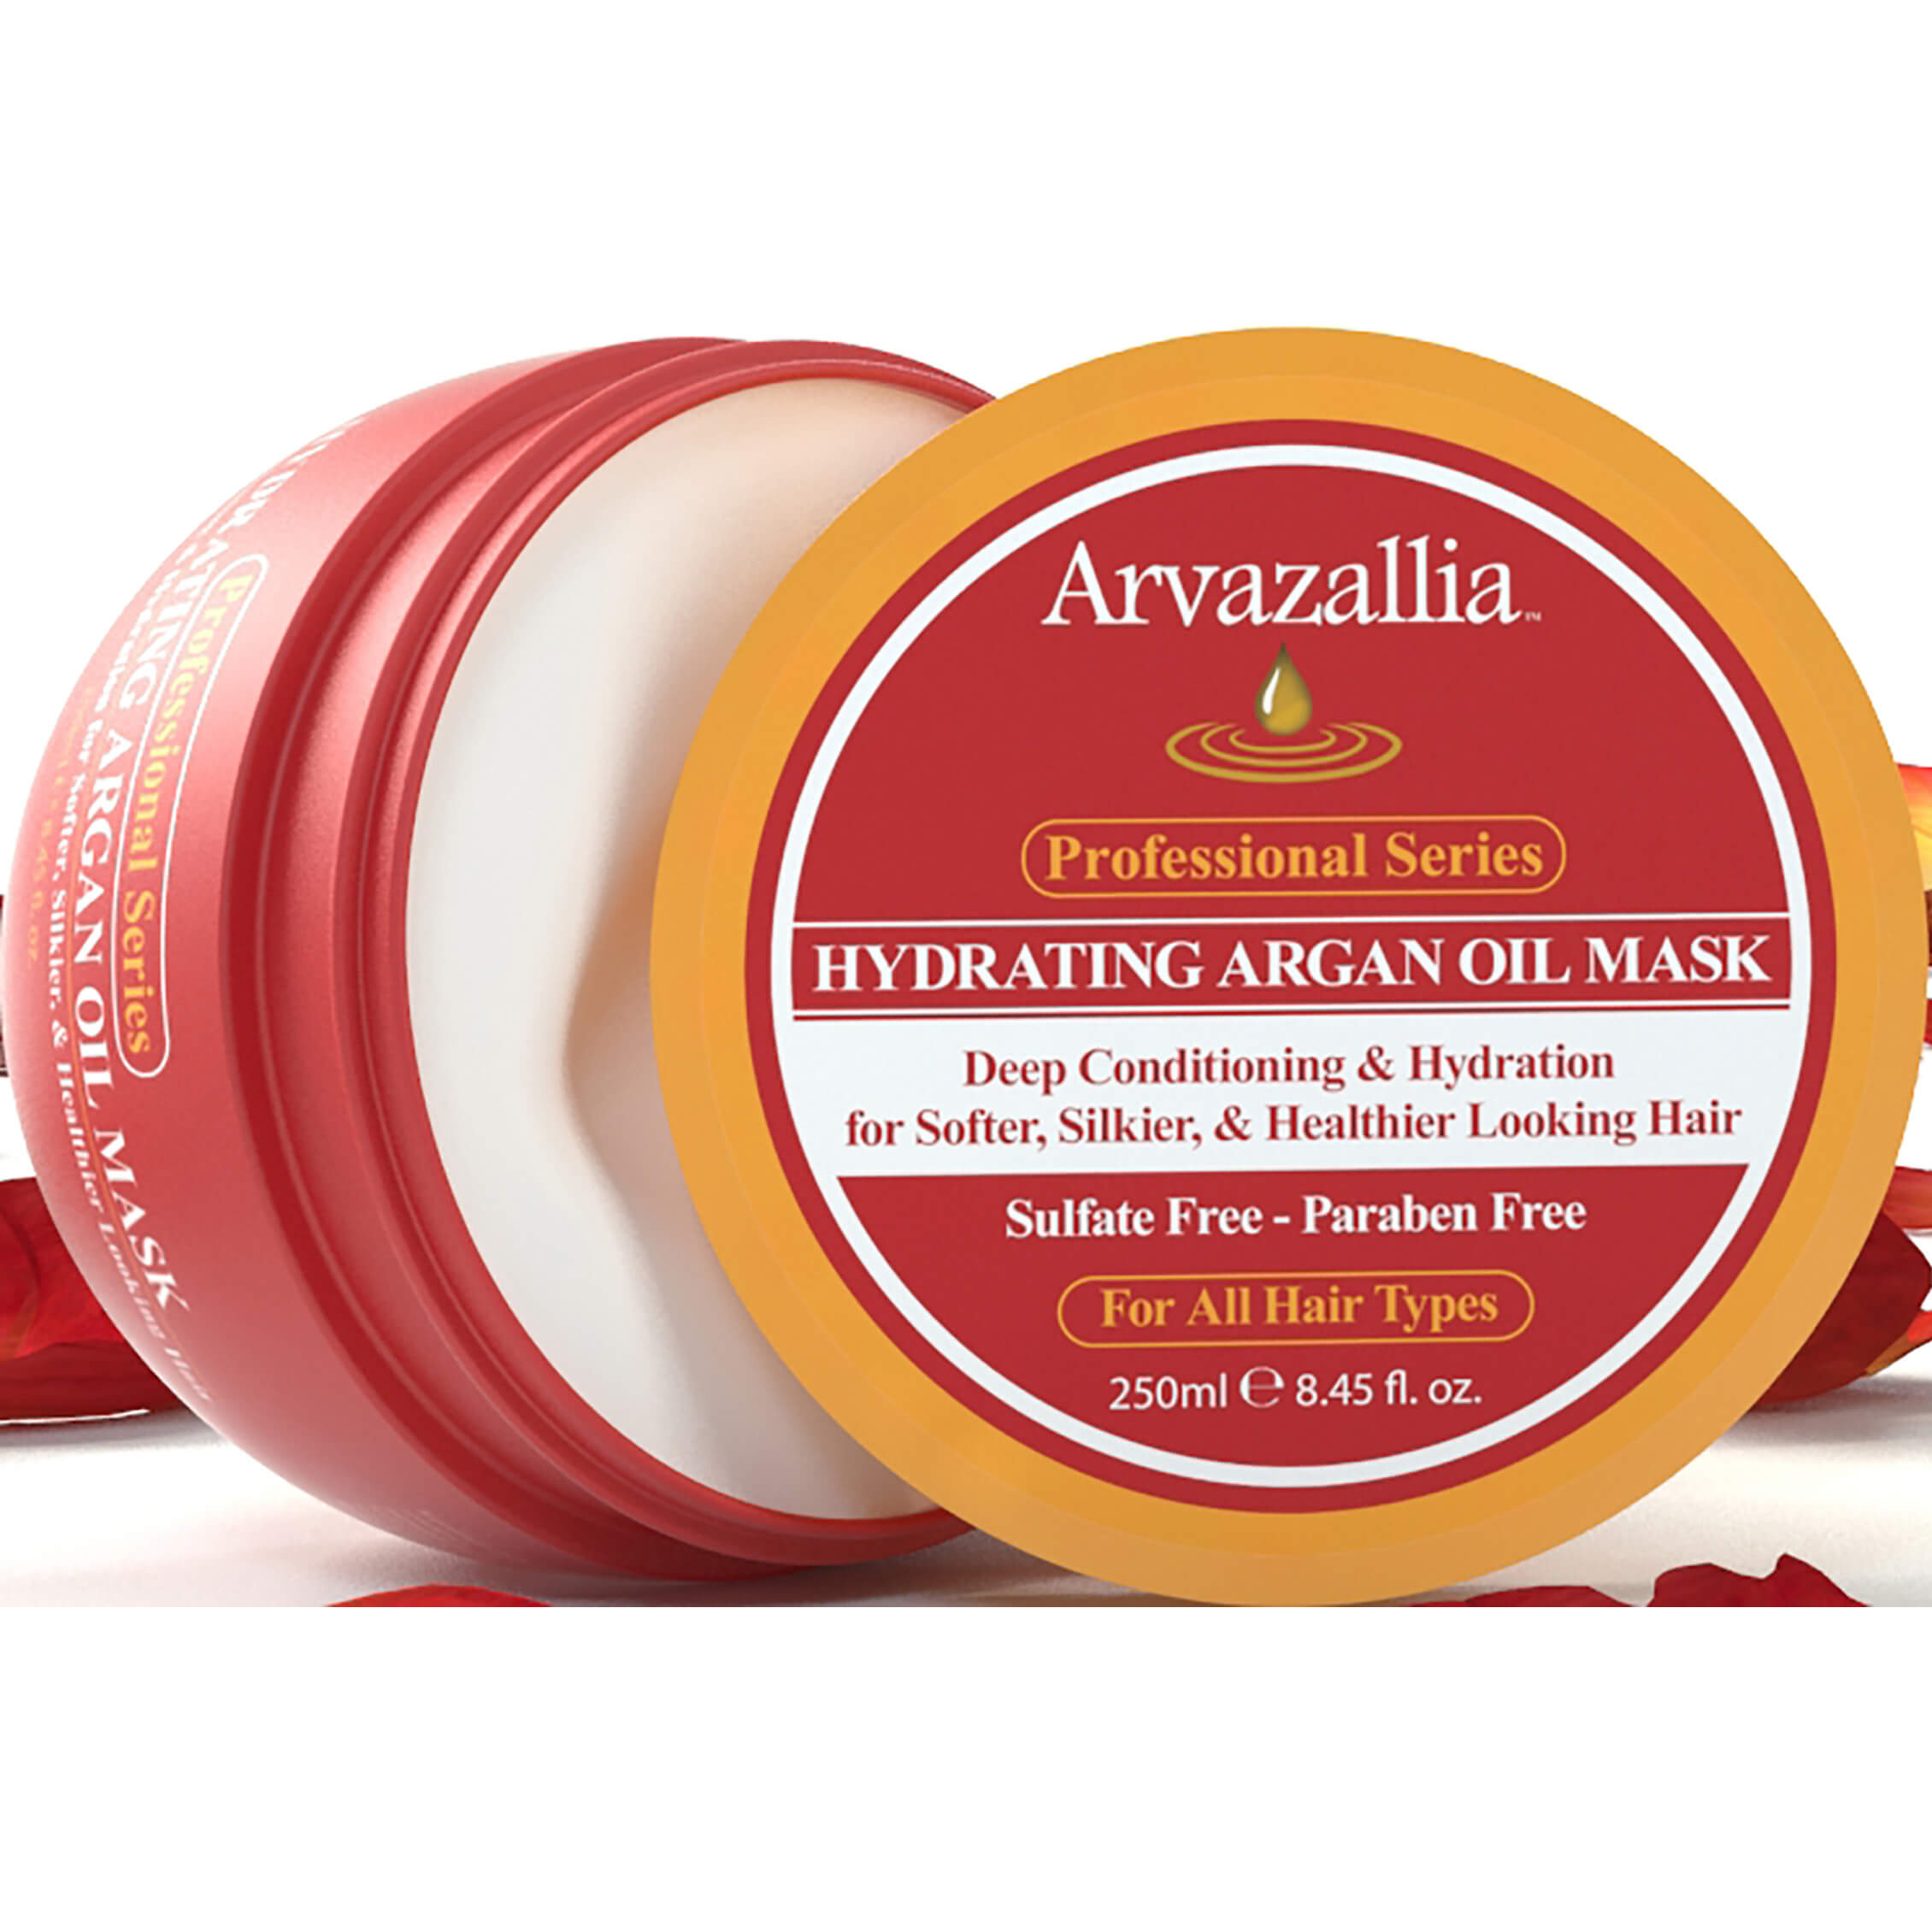 Arvazallia Hydrating Argan Oil Hair Mask and Deep Conditioner for Dry or Damaged Hair - image 2 of 2